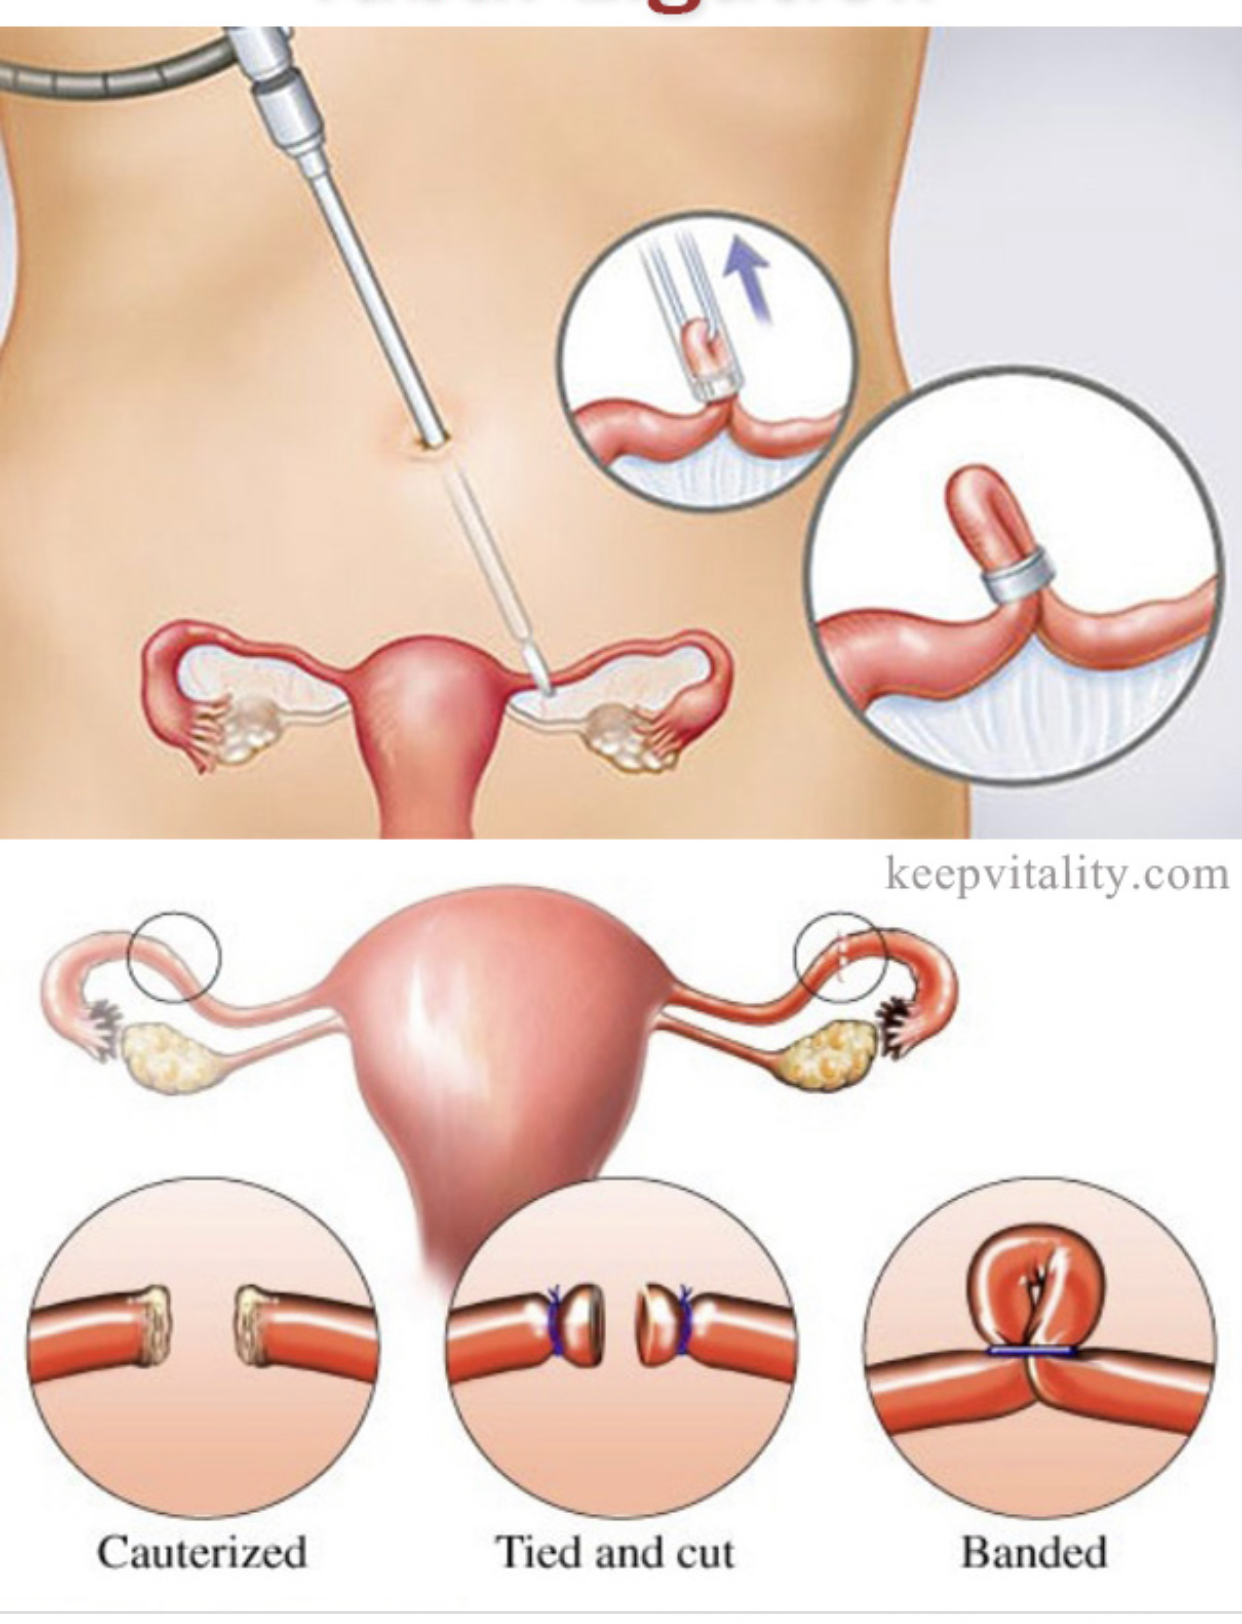 Tubal ligation or tying of tubes in women as a permanent contraceptive method